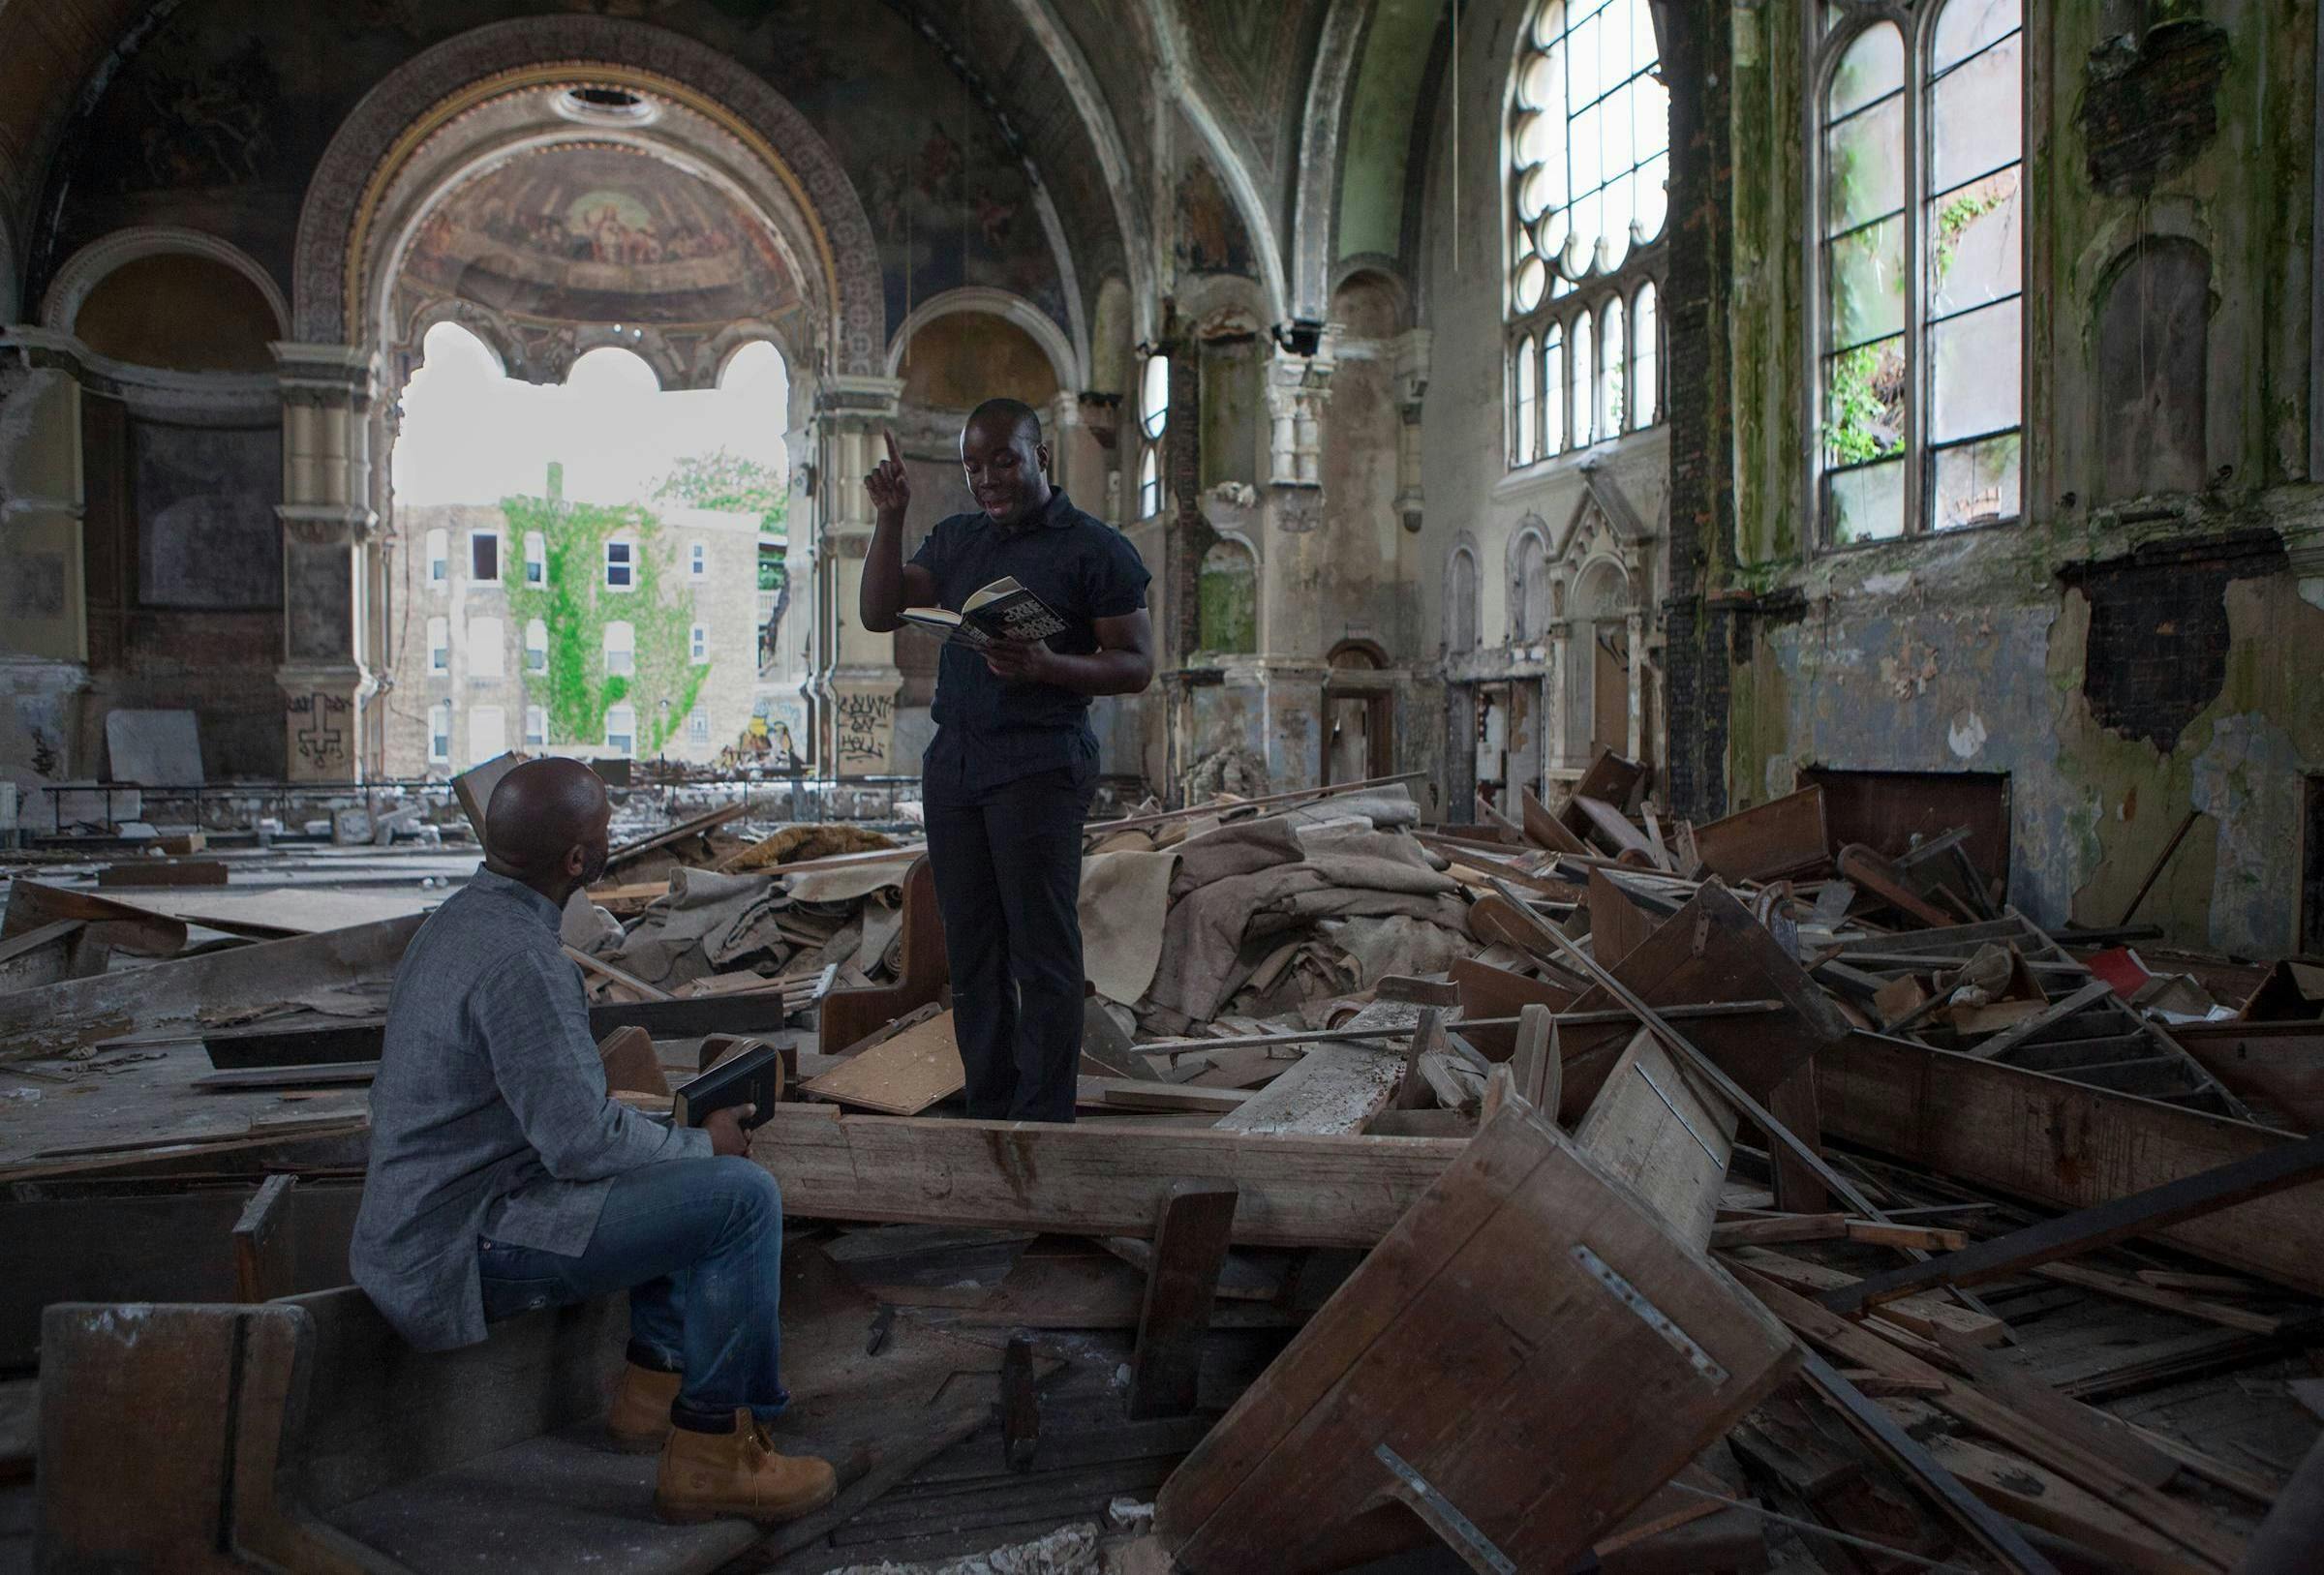 Images of the original performance and demolition of the church. One black monks stands among the ruins, the other is seated. The standing person is reading a loud from a book they hold in their hands